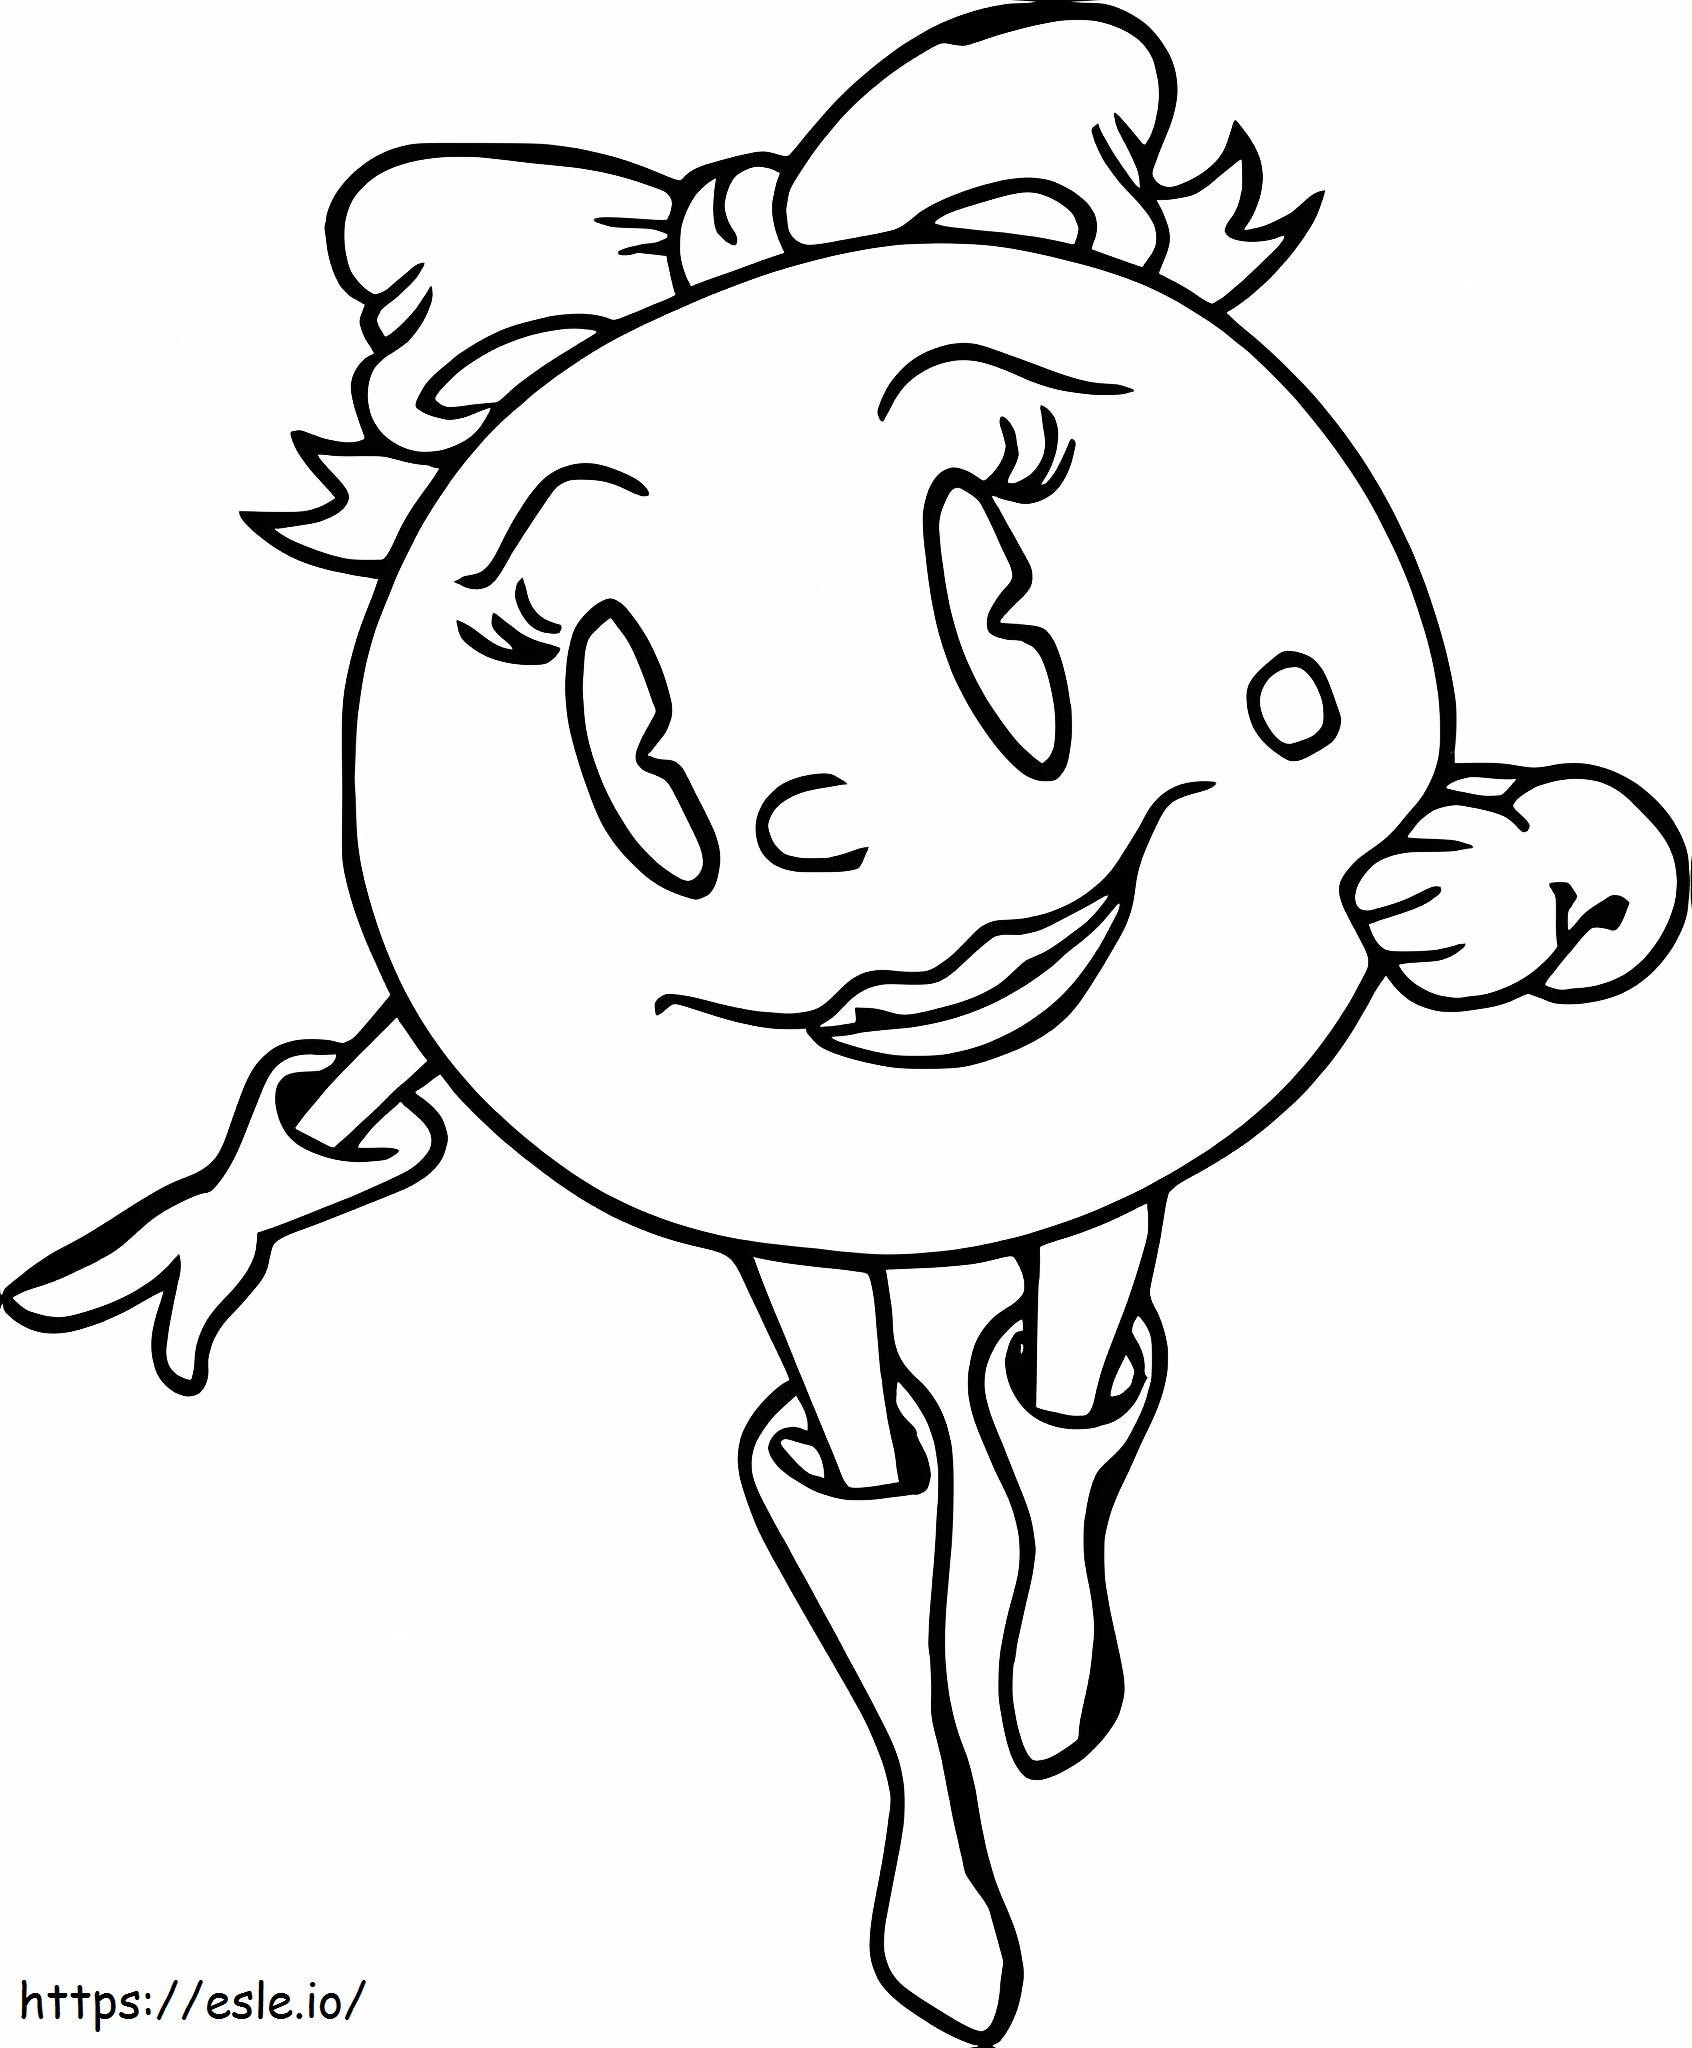 Mrs. Pacman Walking coloring page